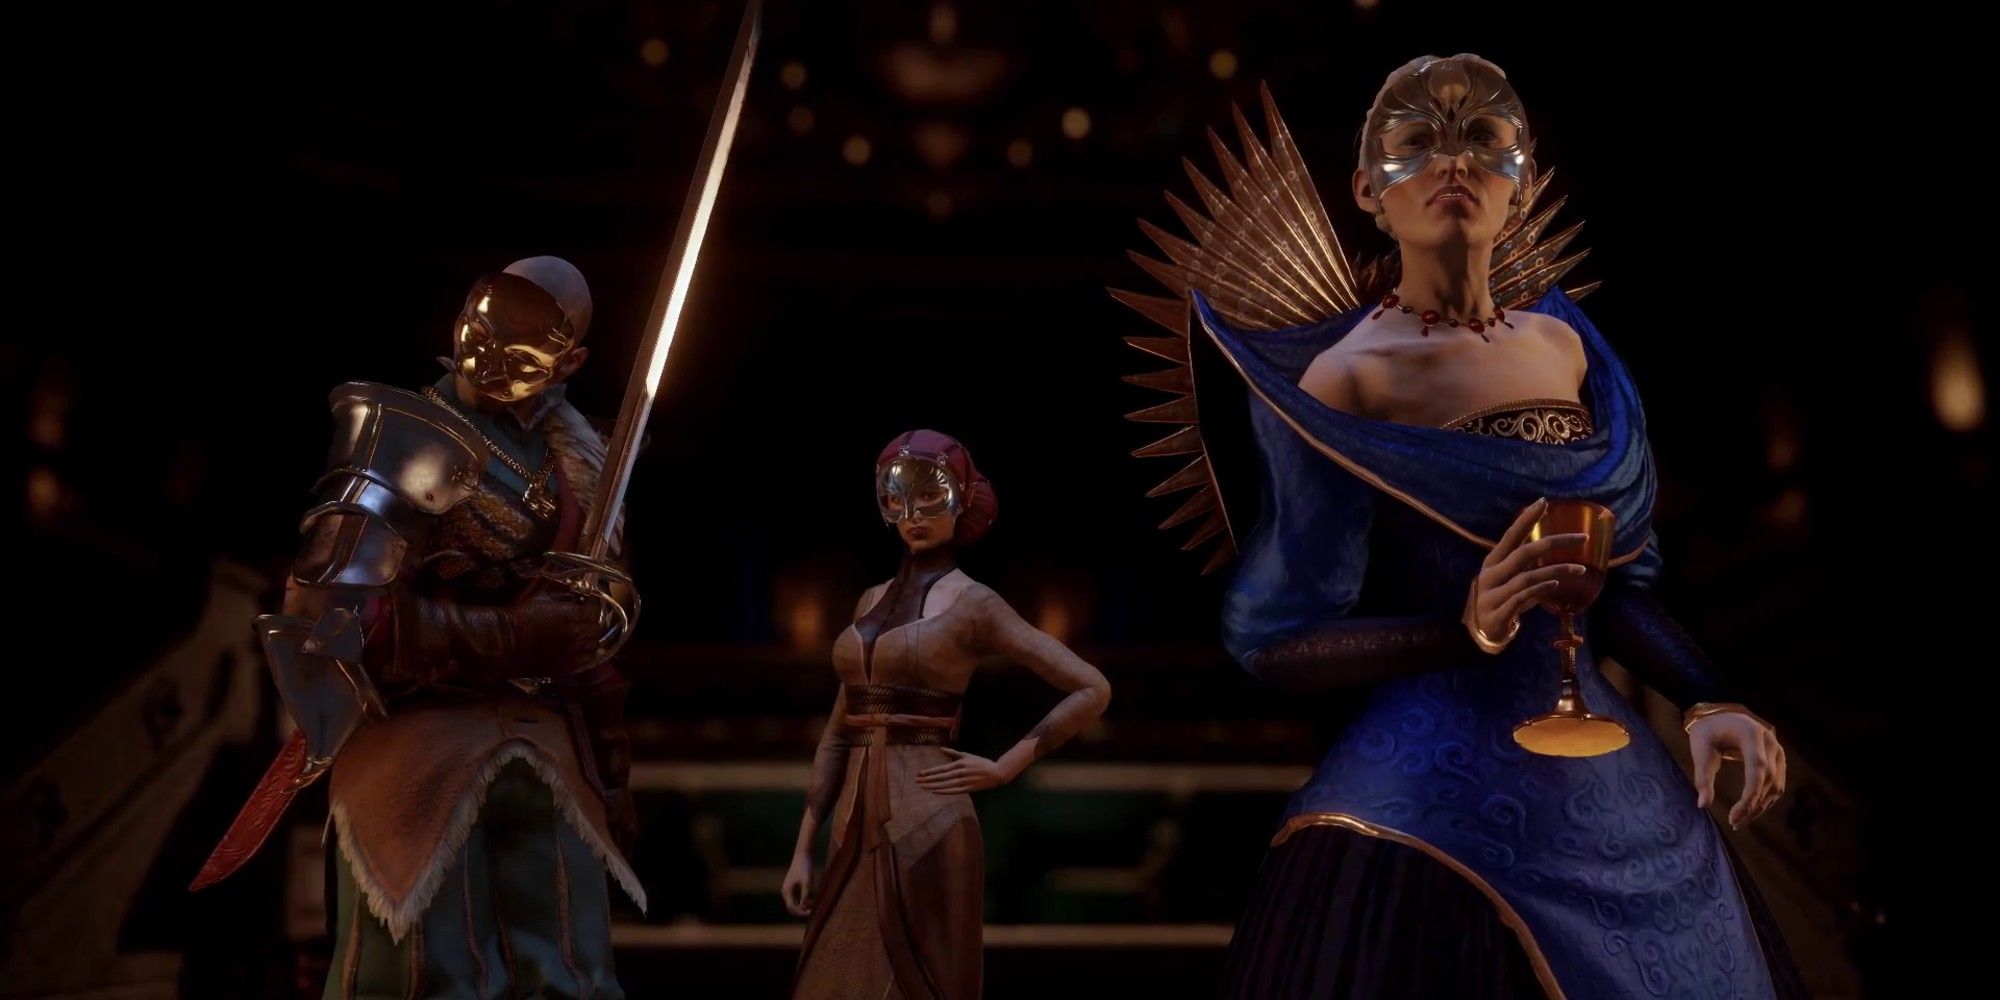 The three main players in Wicked Eyes and Wicked Hearts in Dragon Age: Inquisition: Gaspard, Briala, and Celene